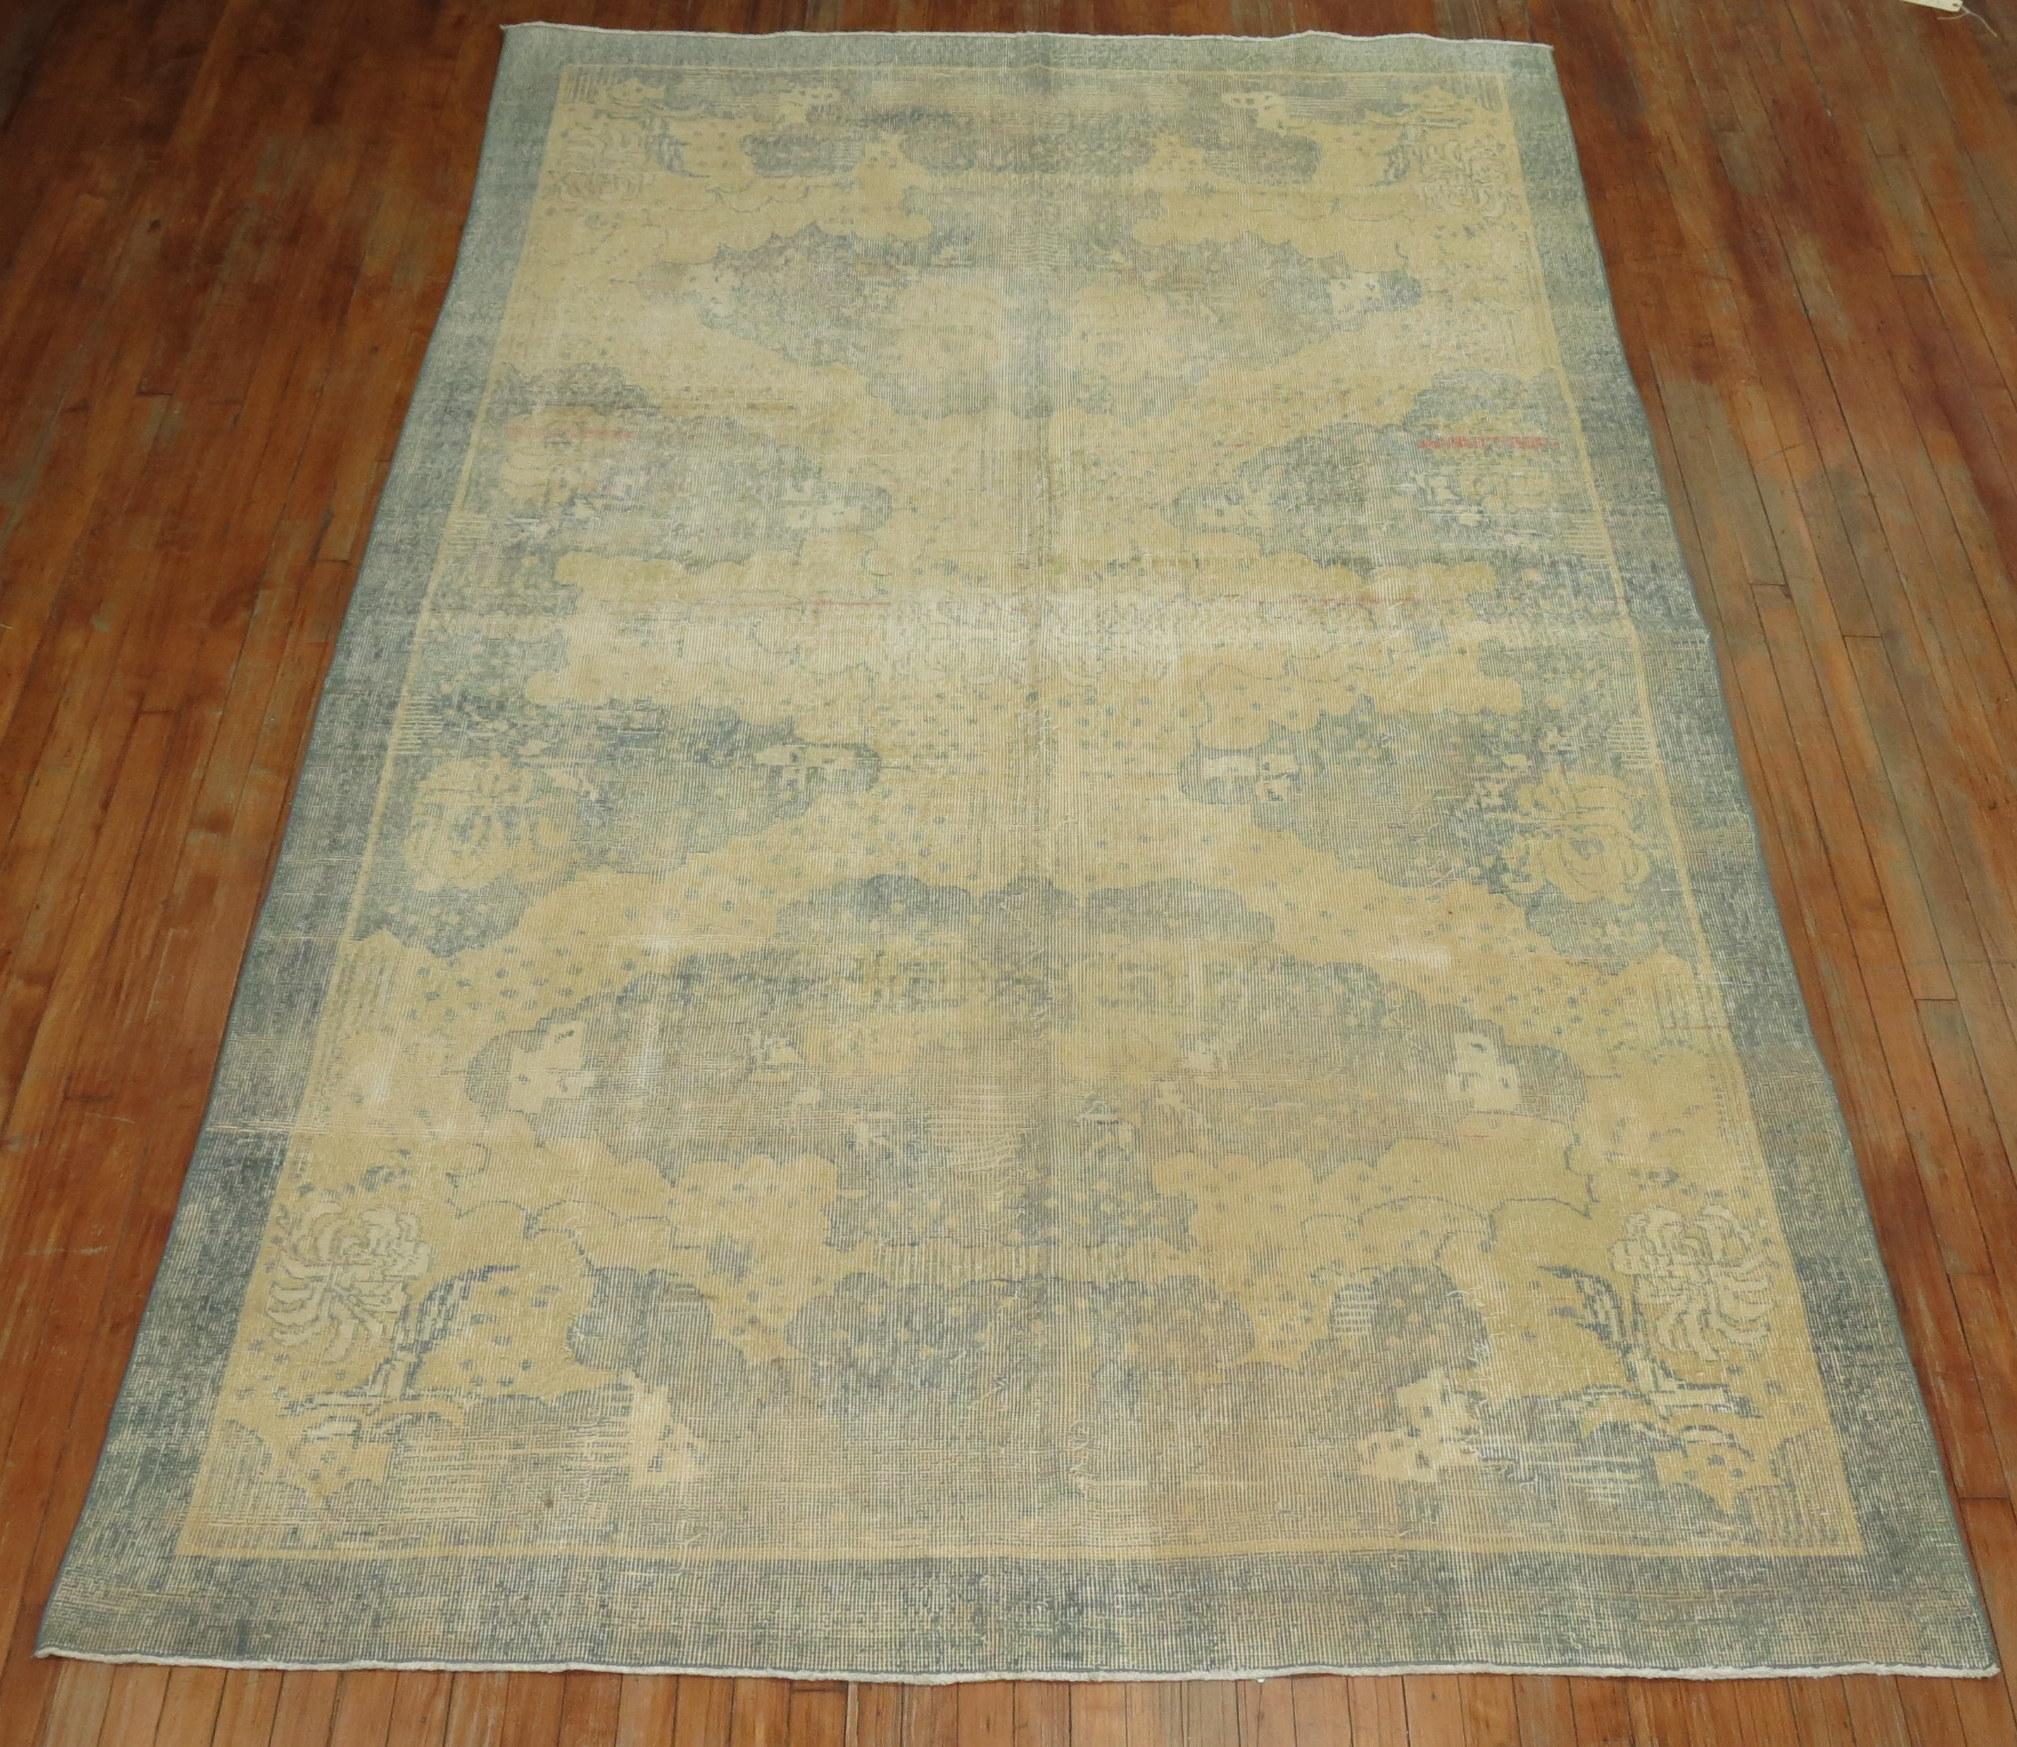 One-of-a-kind shabby chic mid-20th century Turkish deco pictorial rug.

6'6'' x 10'3''